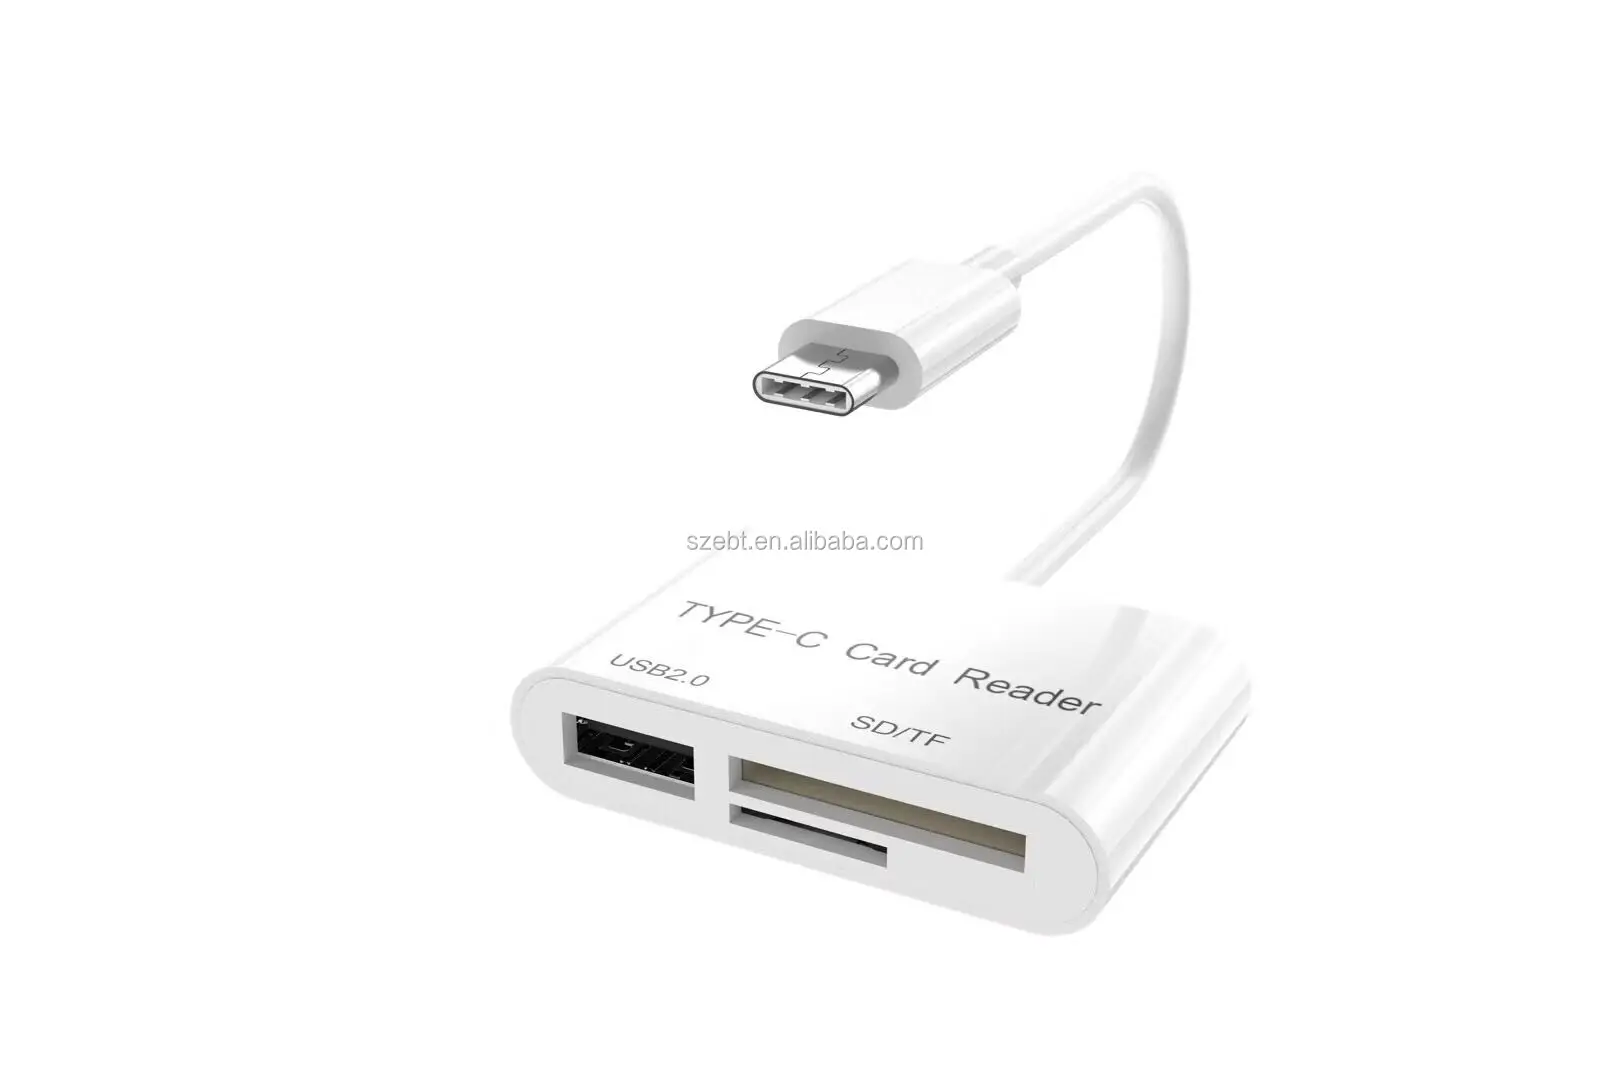 usb 2.0 all in 1 card reader cord